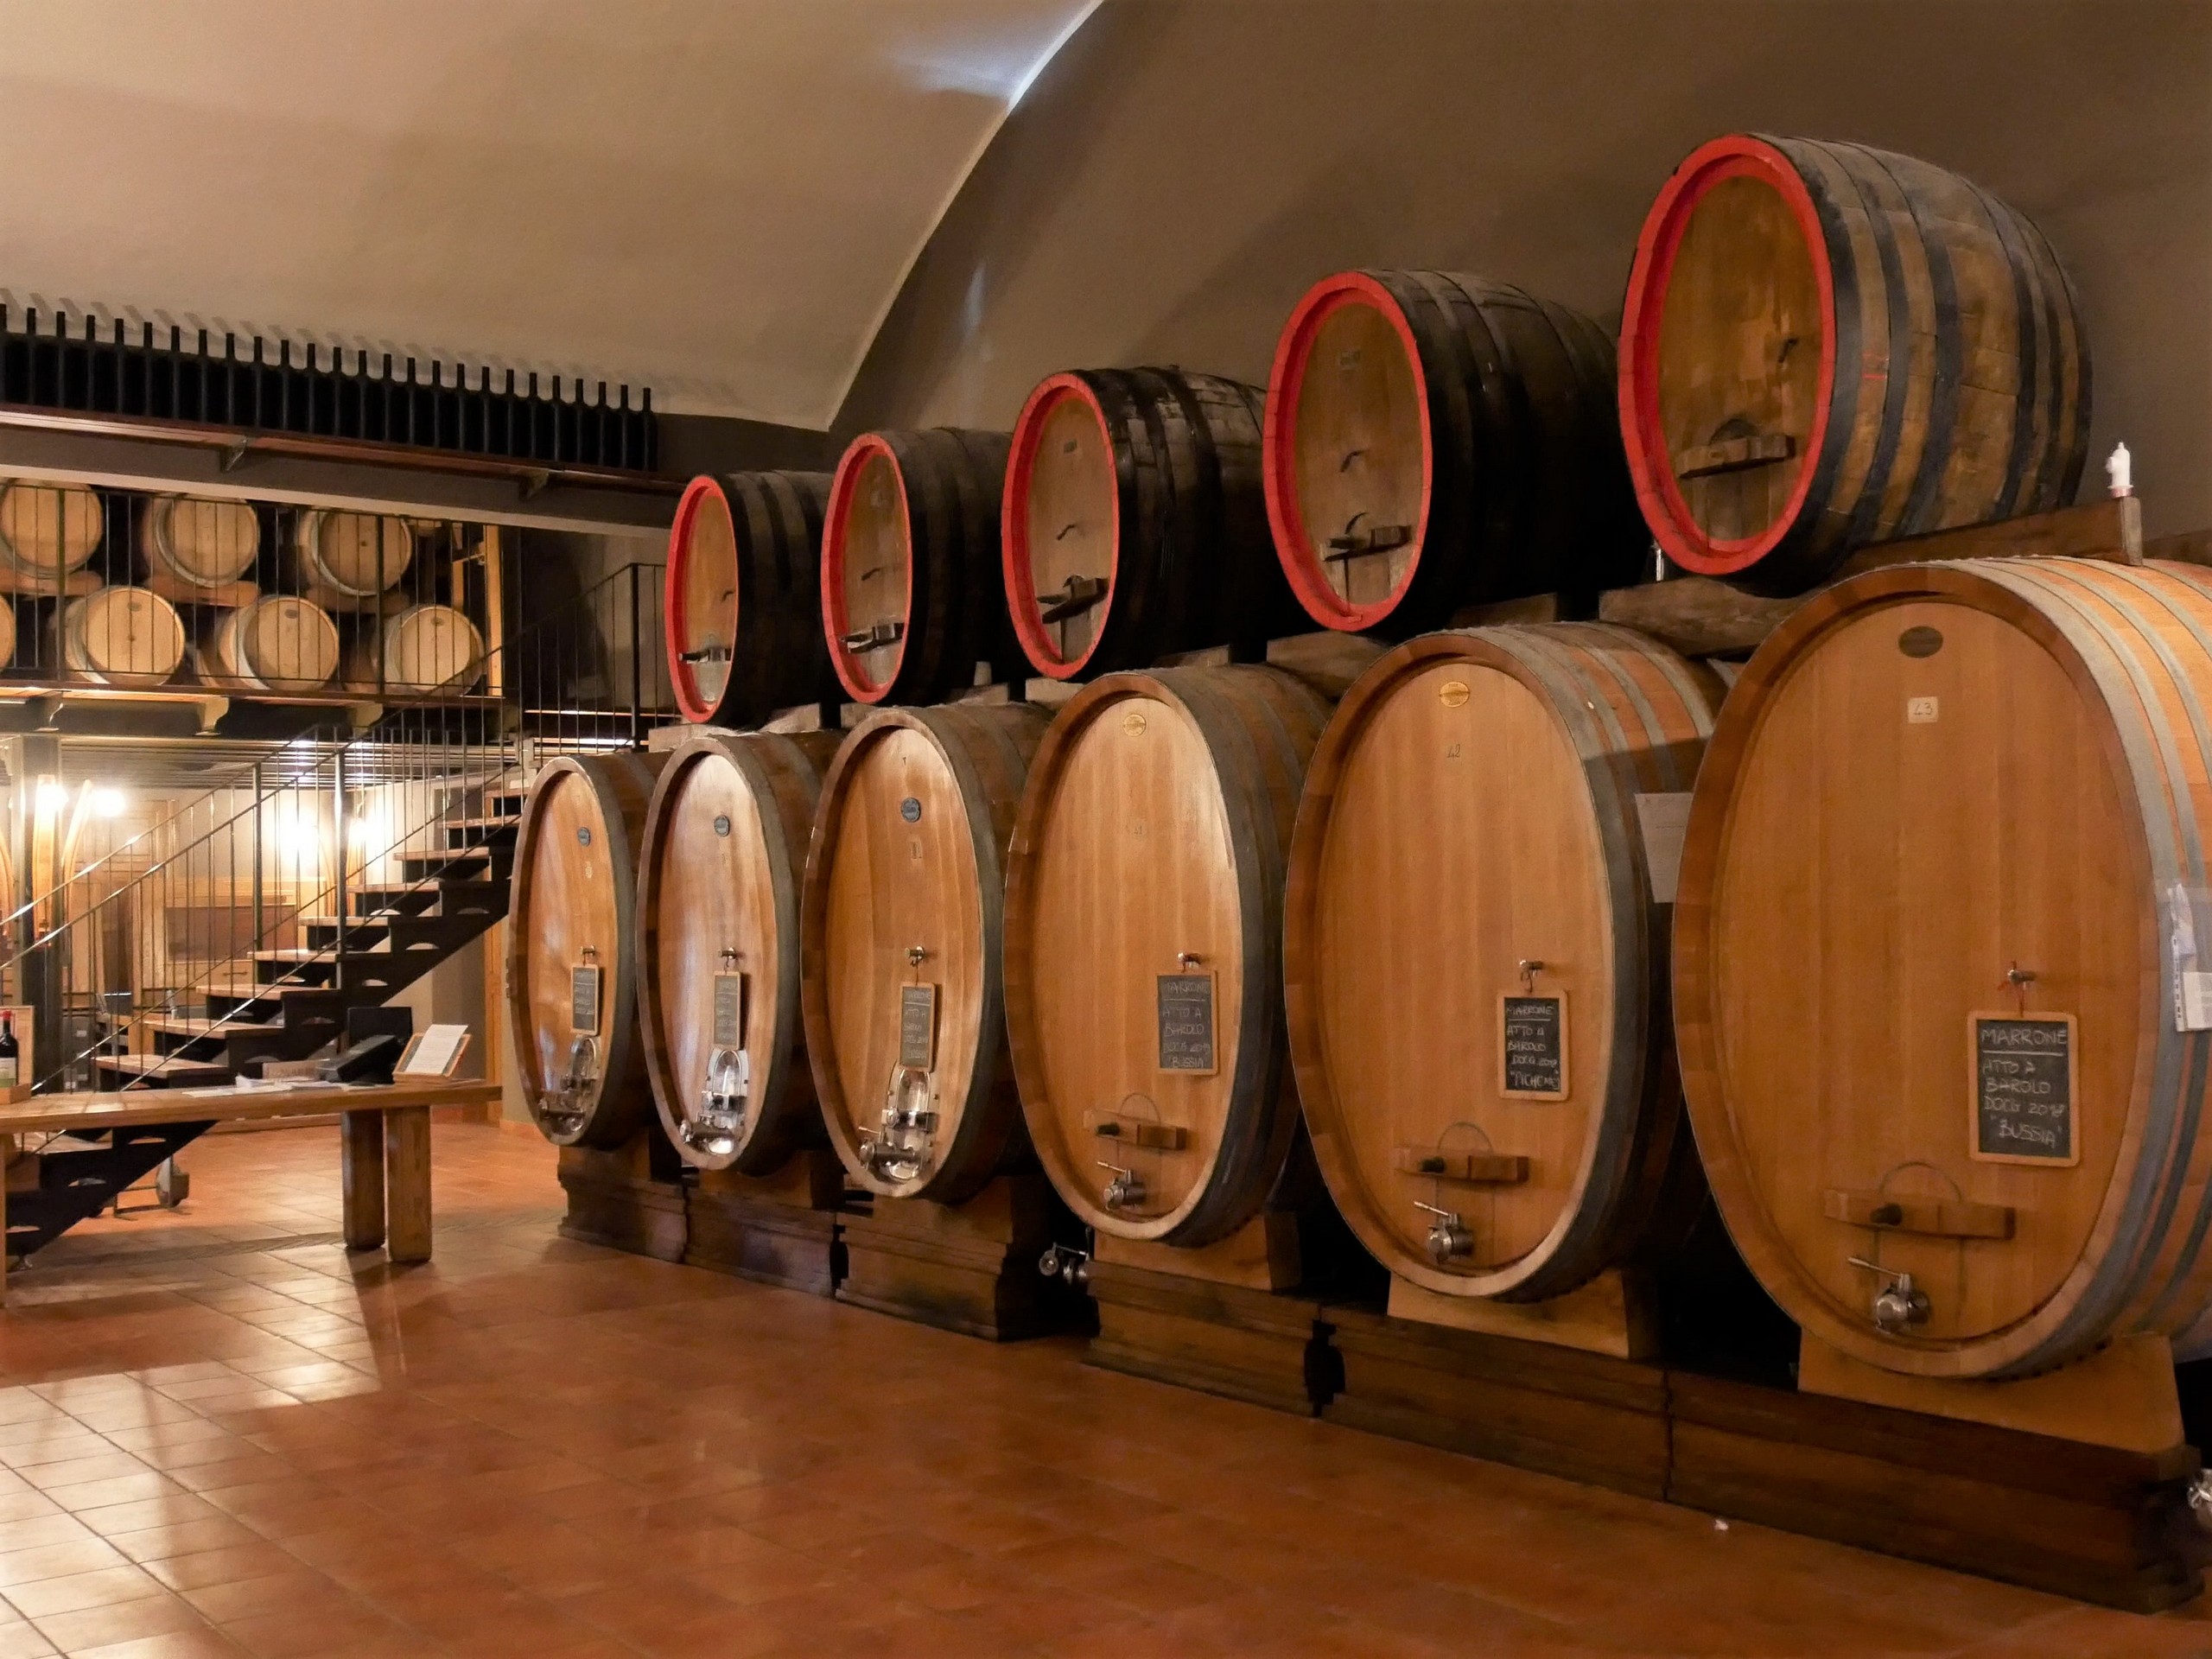 Winery visited while on a guided tour in Barolo